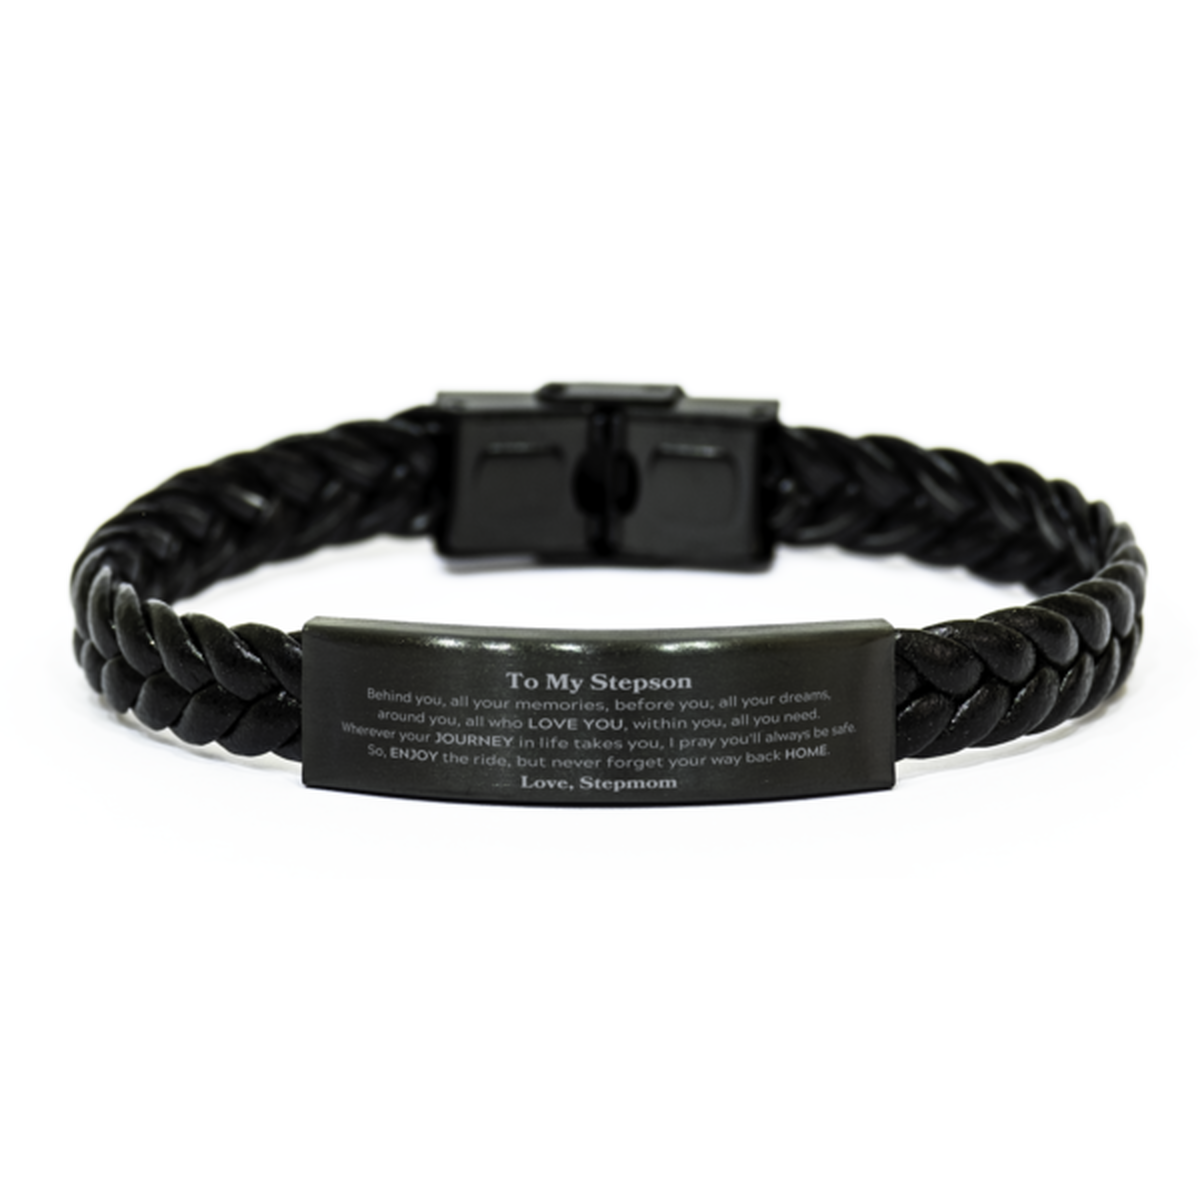 To My Stepson Graduation Gifts from Stepmom, Stepson Braided Leather Bracelet Christmas Birthday Gifts for Stepson Behind you, all your memories, before you, all your dreams. Love, Stepmom